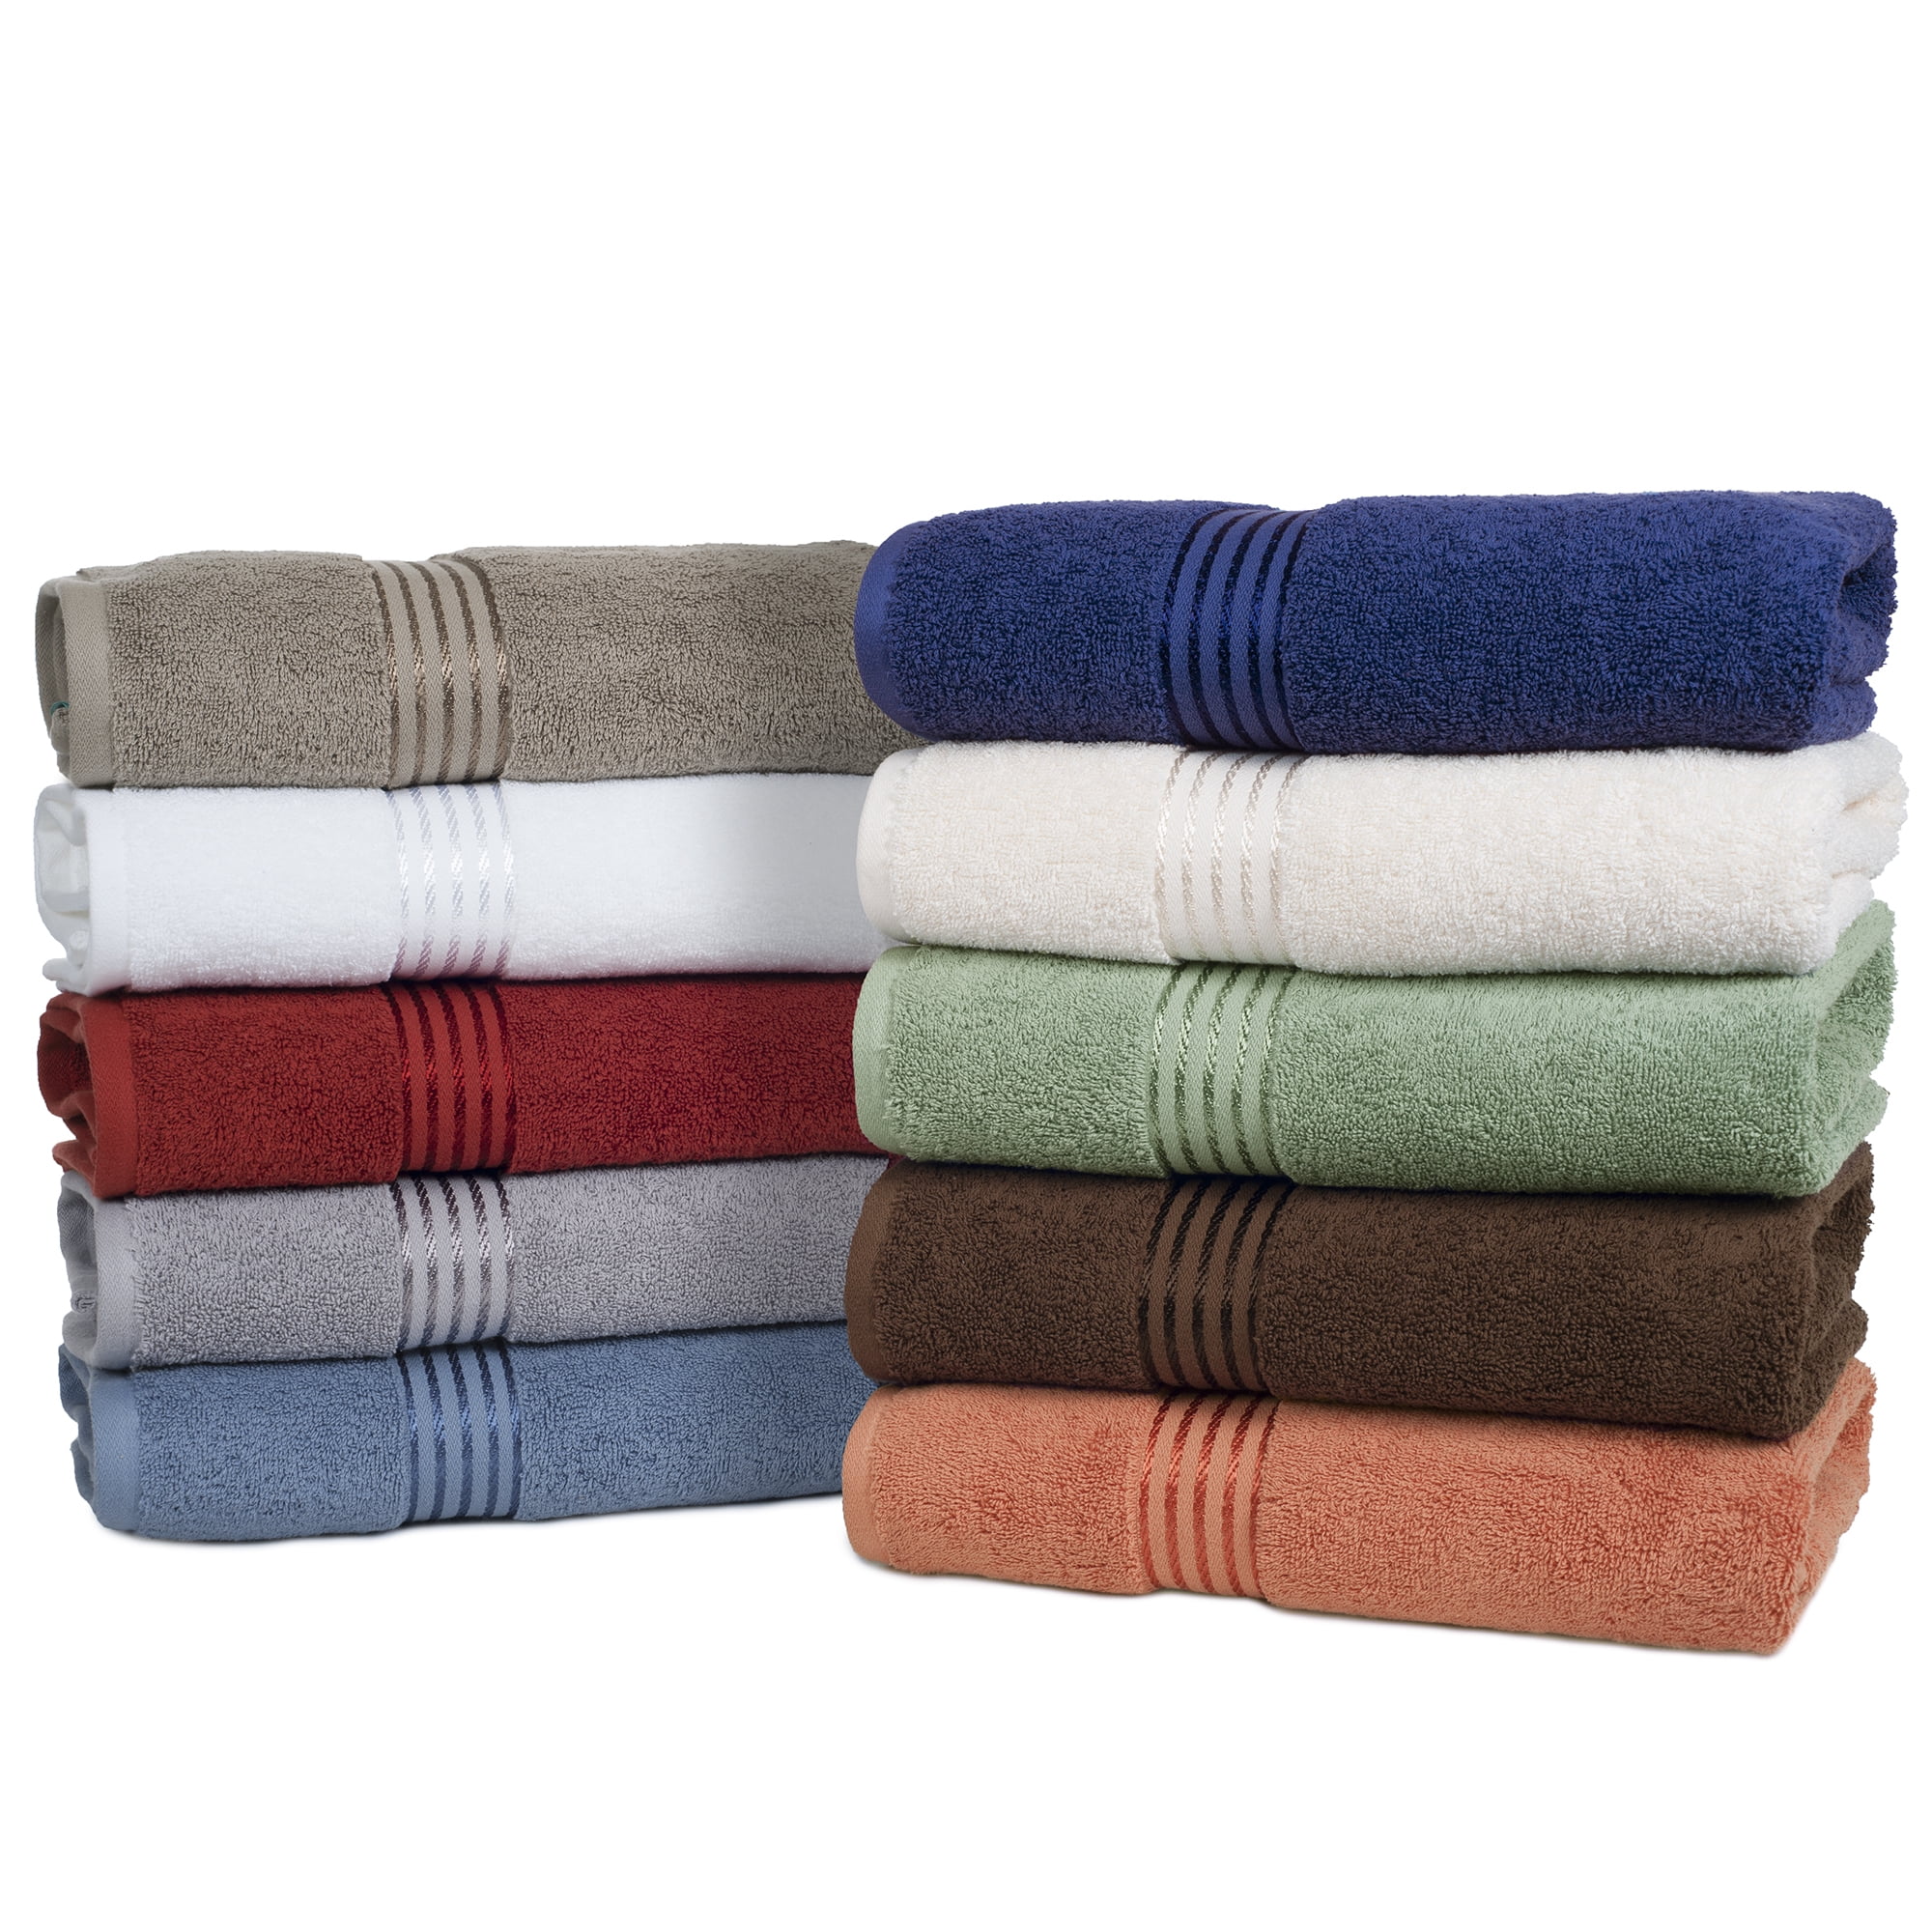 Lavish Touch 100% Egyptian 2 Ply Cotton 700 GSM Mosaic Pack of 6 Hand Towels